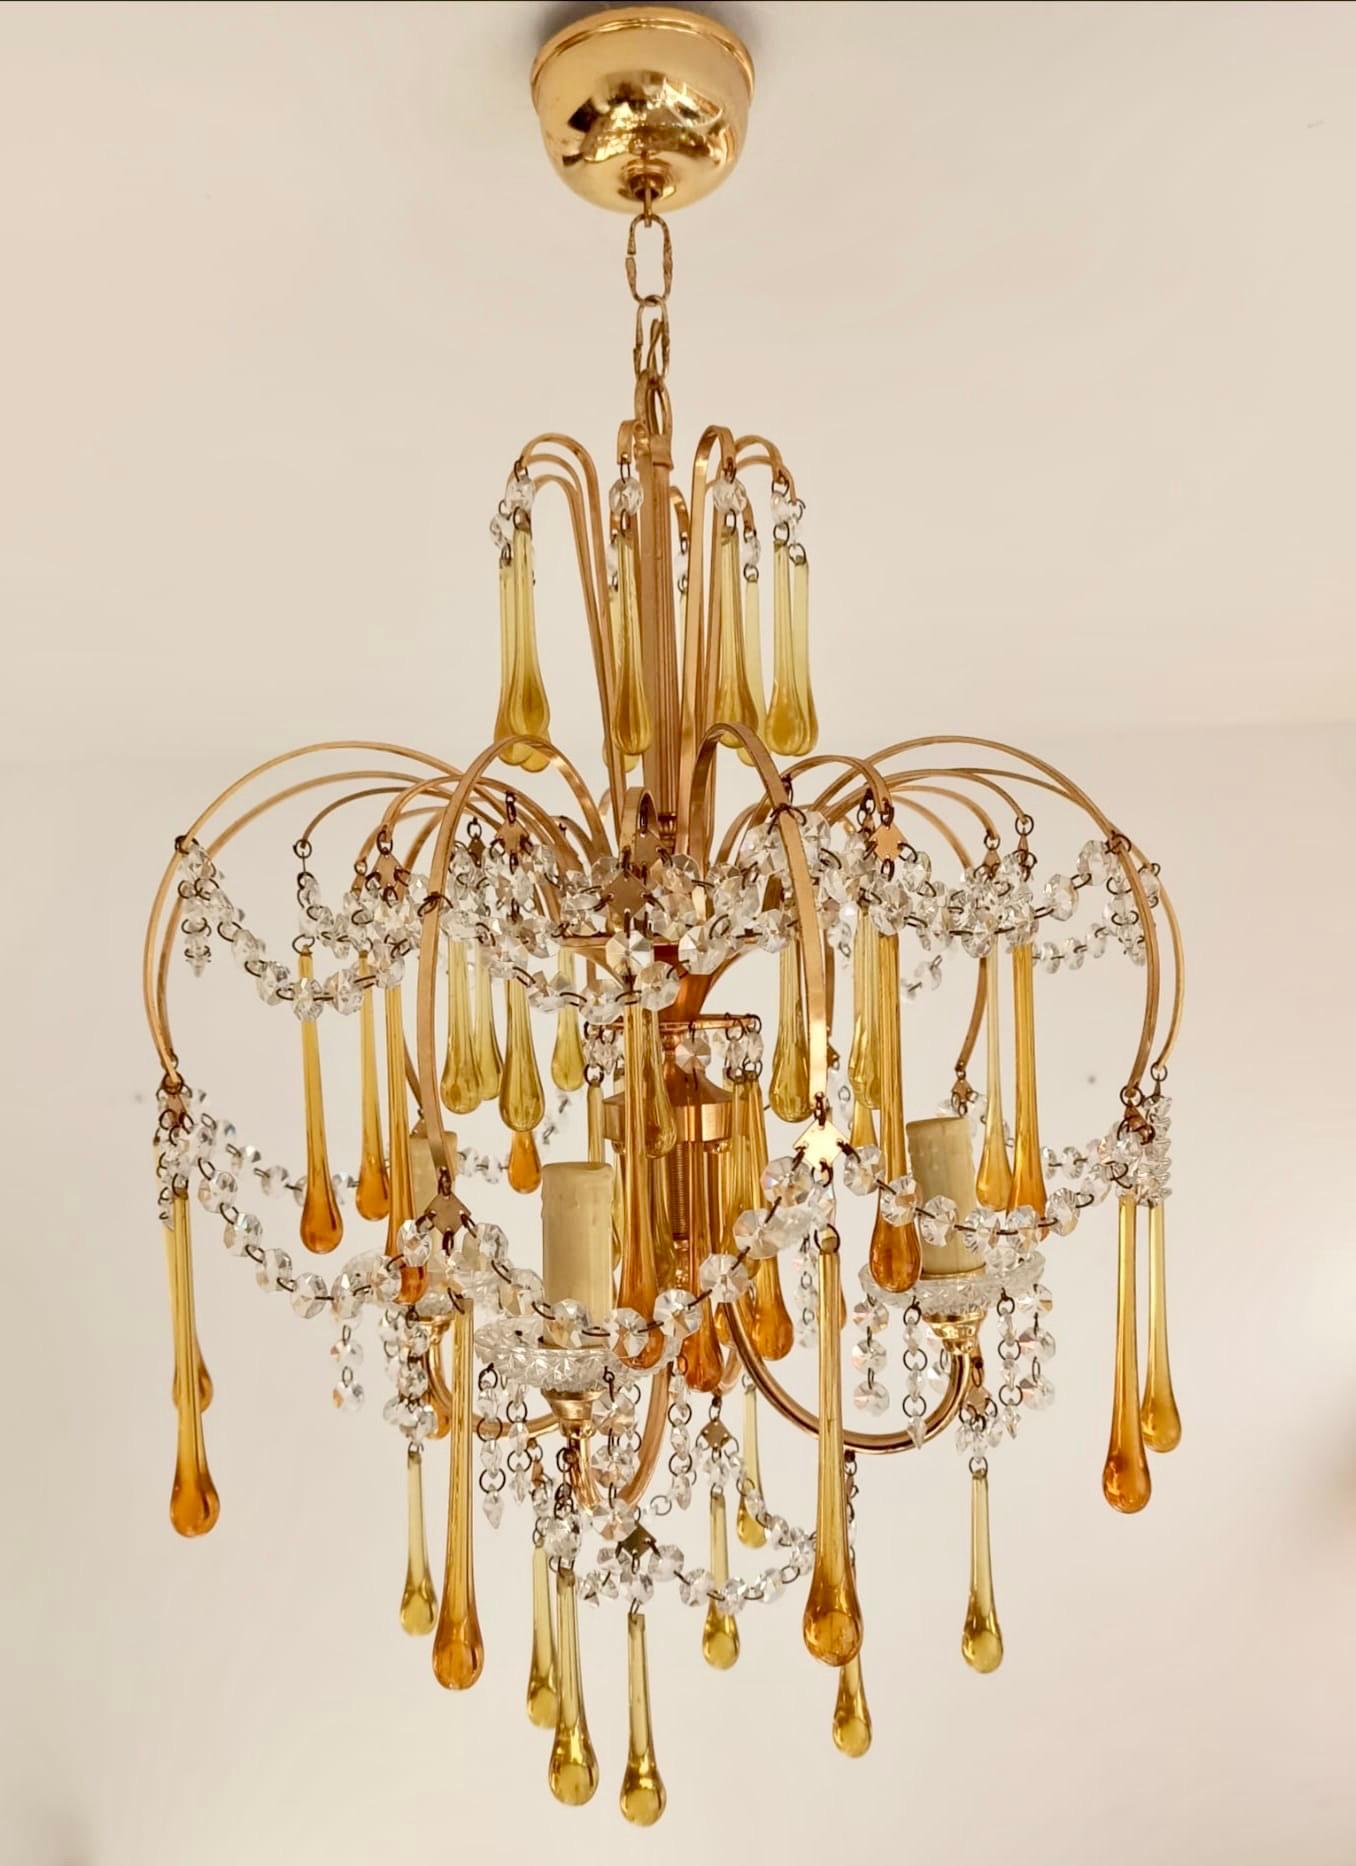 Italian Brass and Murano Amber Glass Tear Drop Chandelier by Paolo Venini, 1960 In Good Condition For Sale In Paris, France